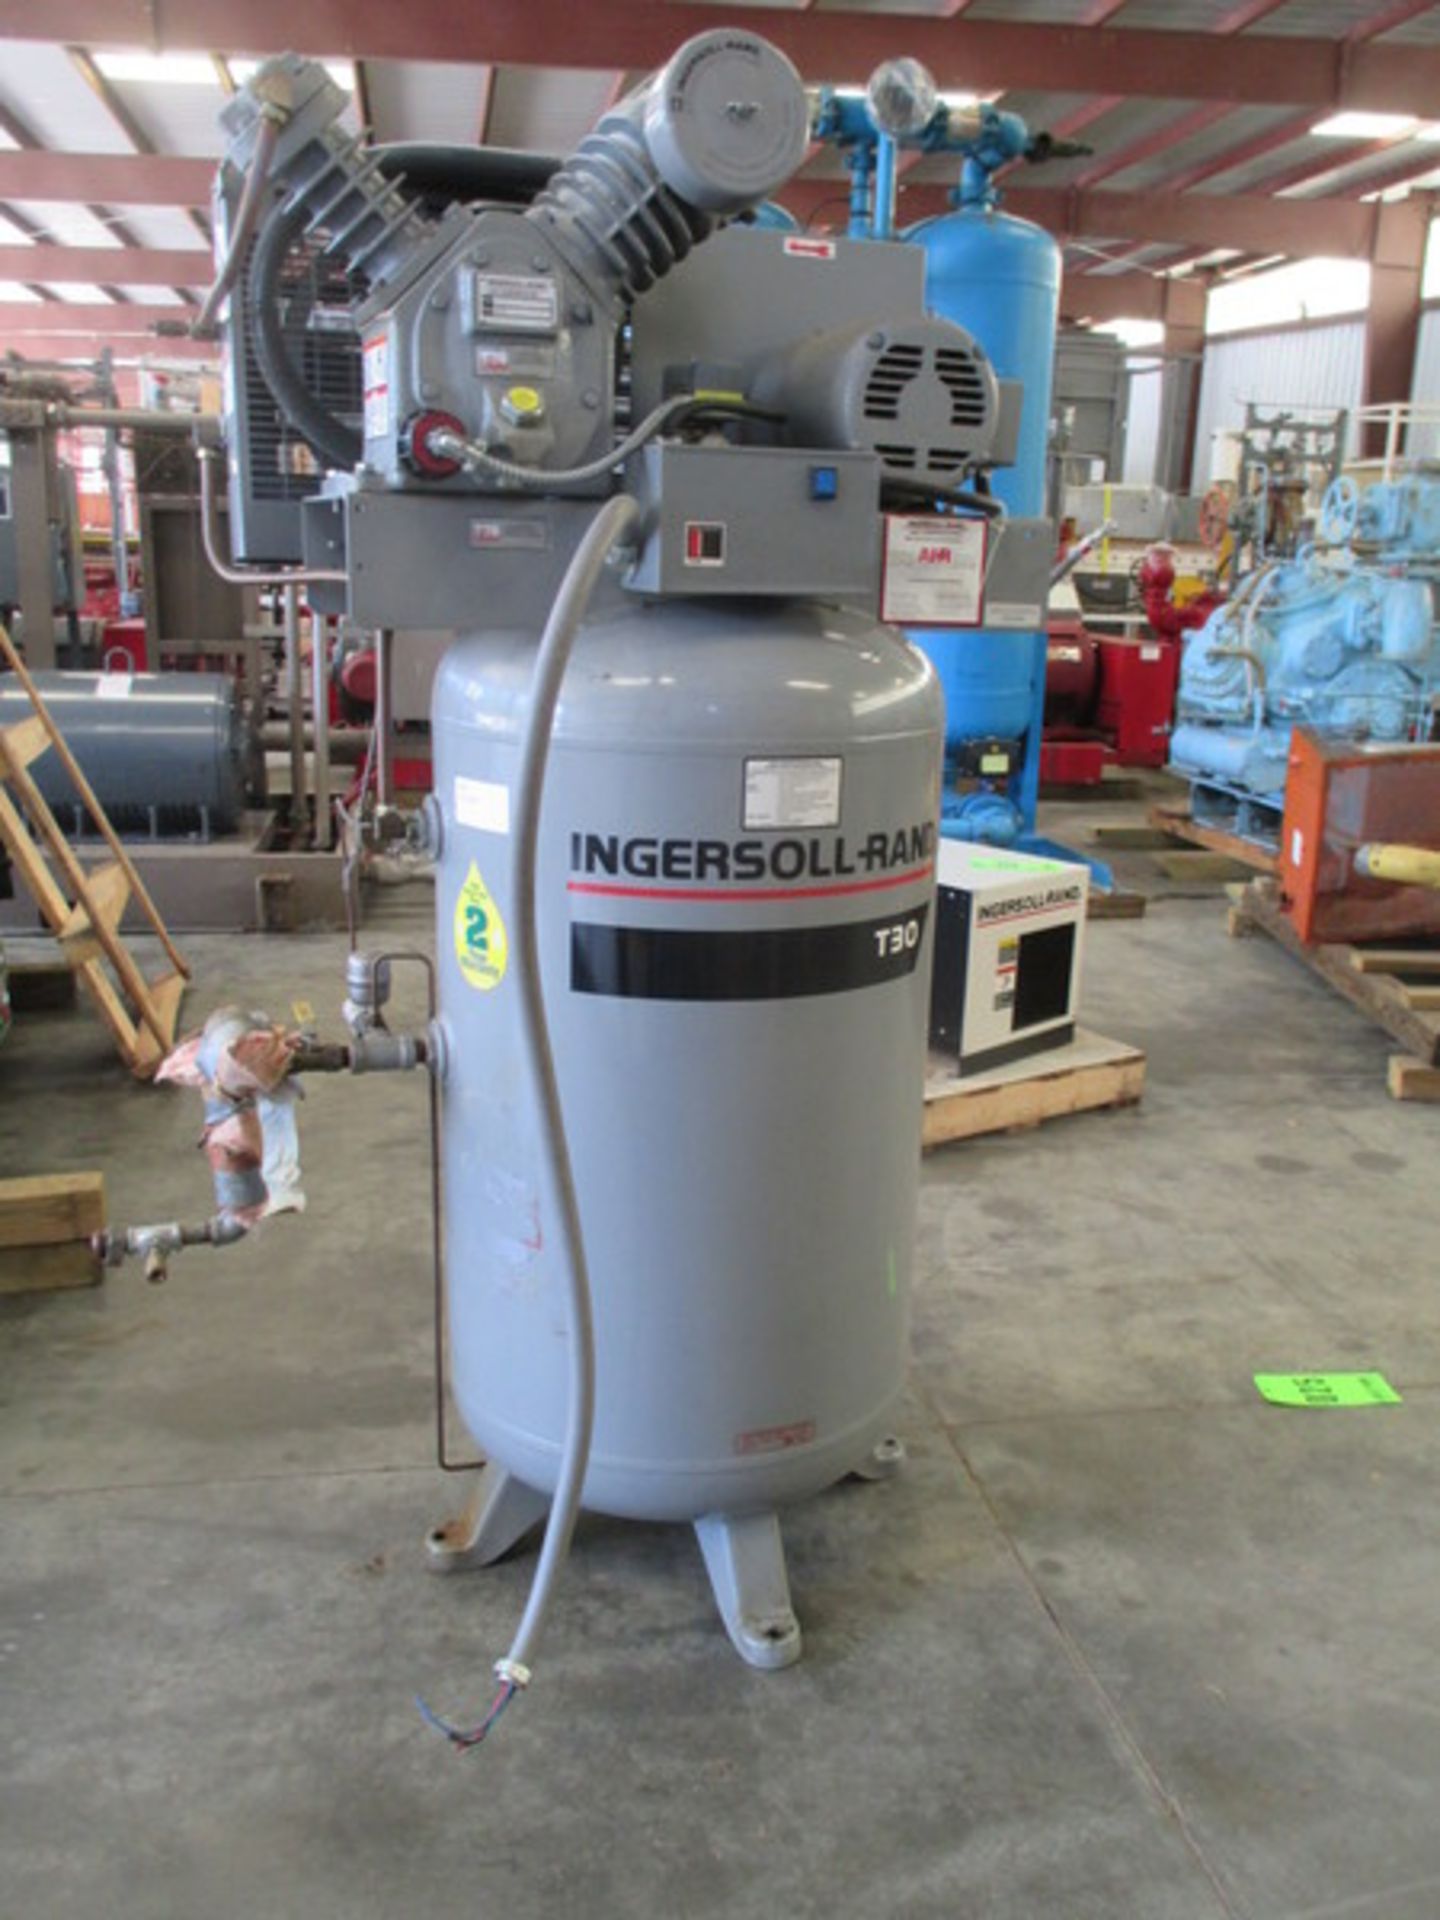 Ingersol Rand T30 Reciprocating Air Compressor - Image 3 of 4